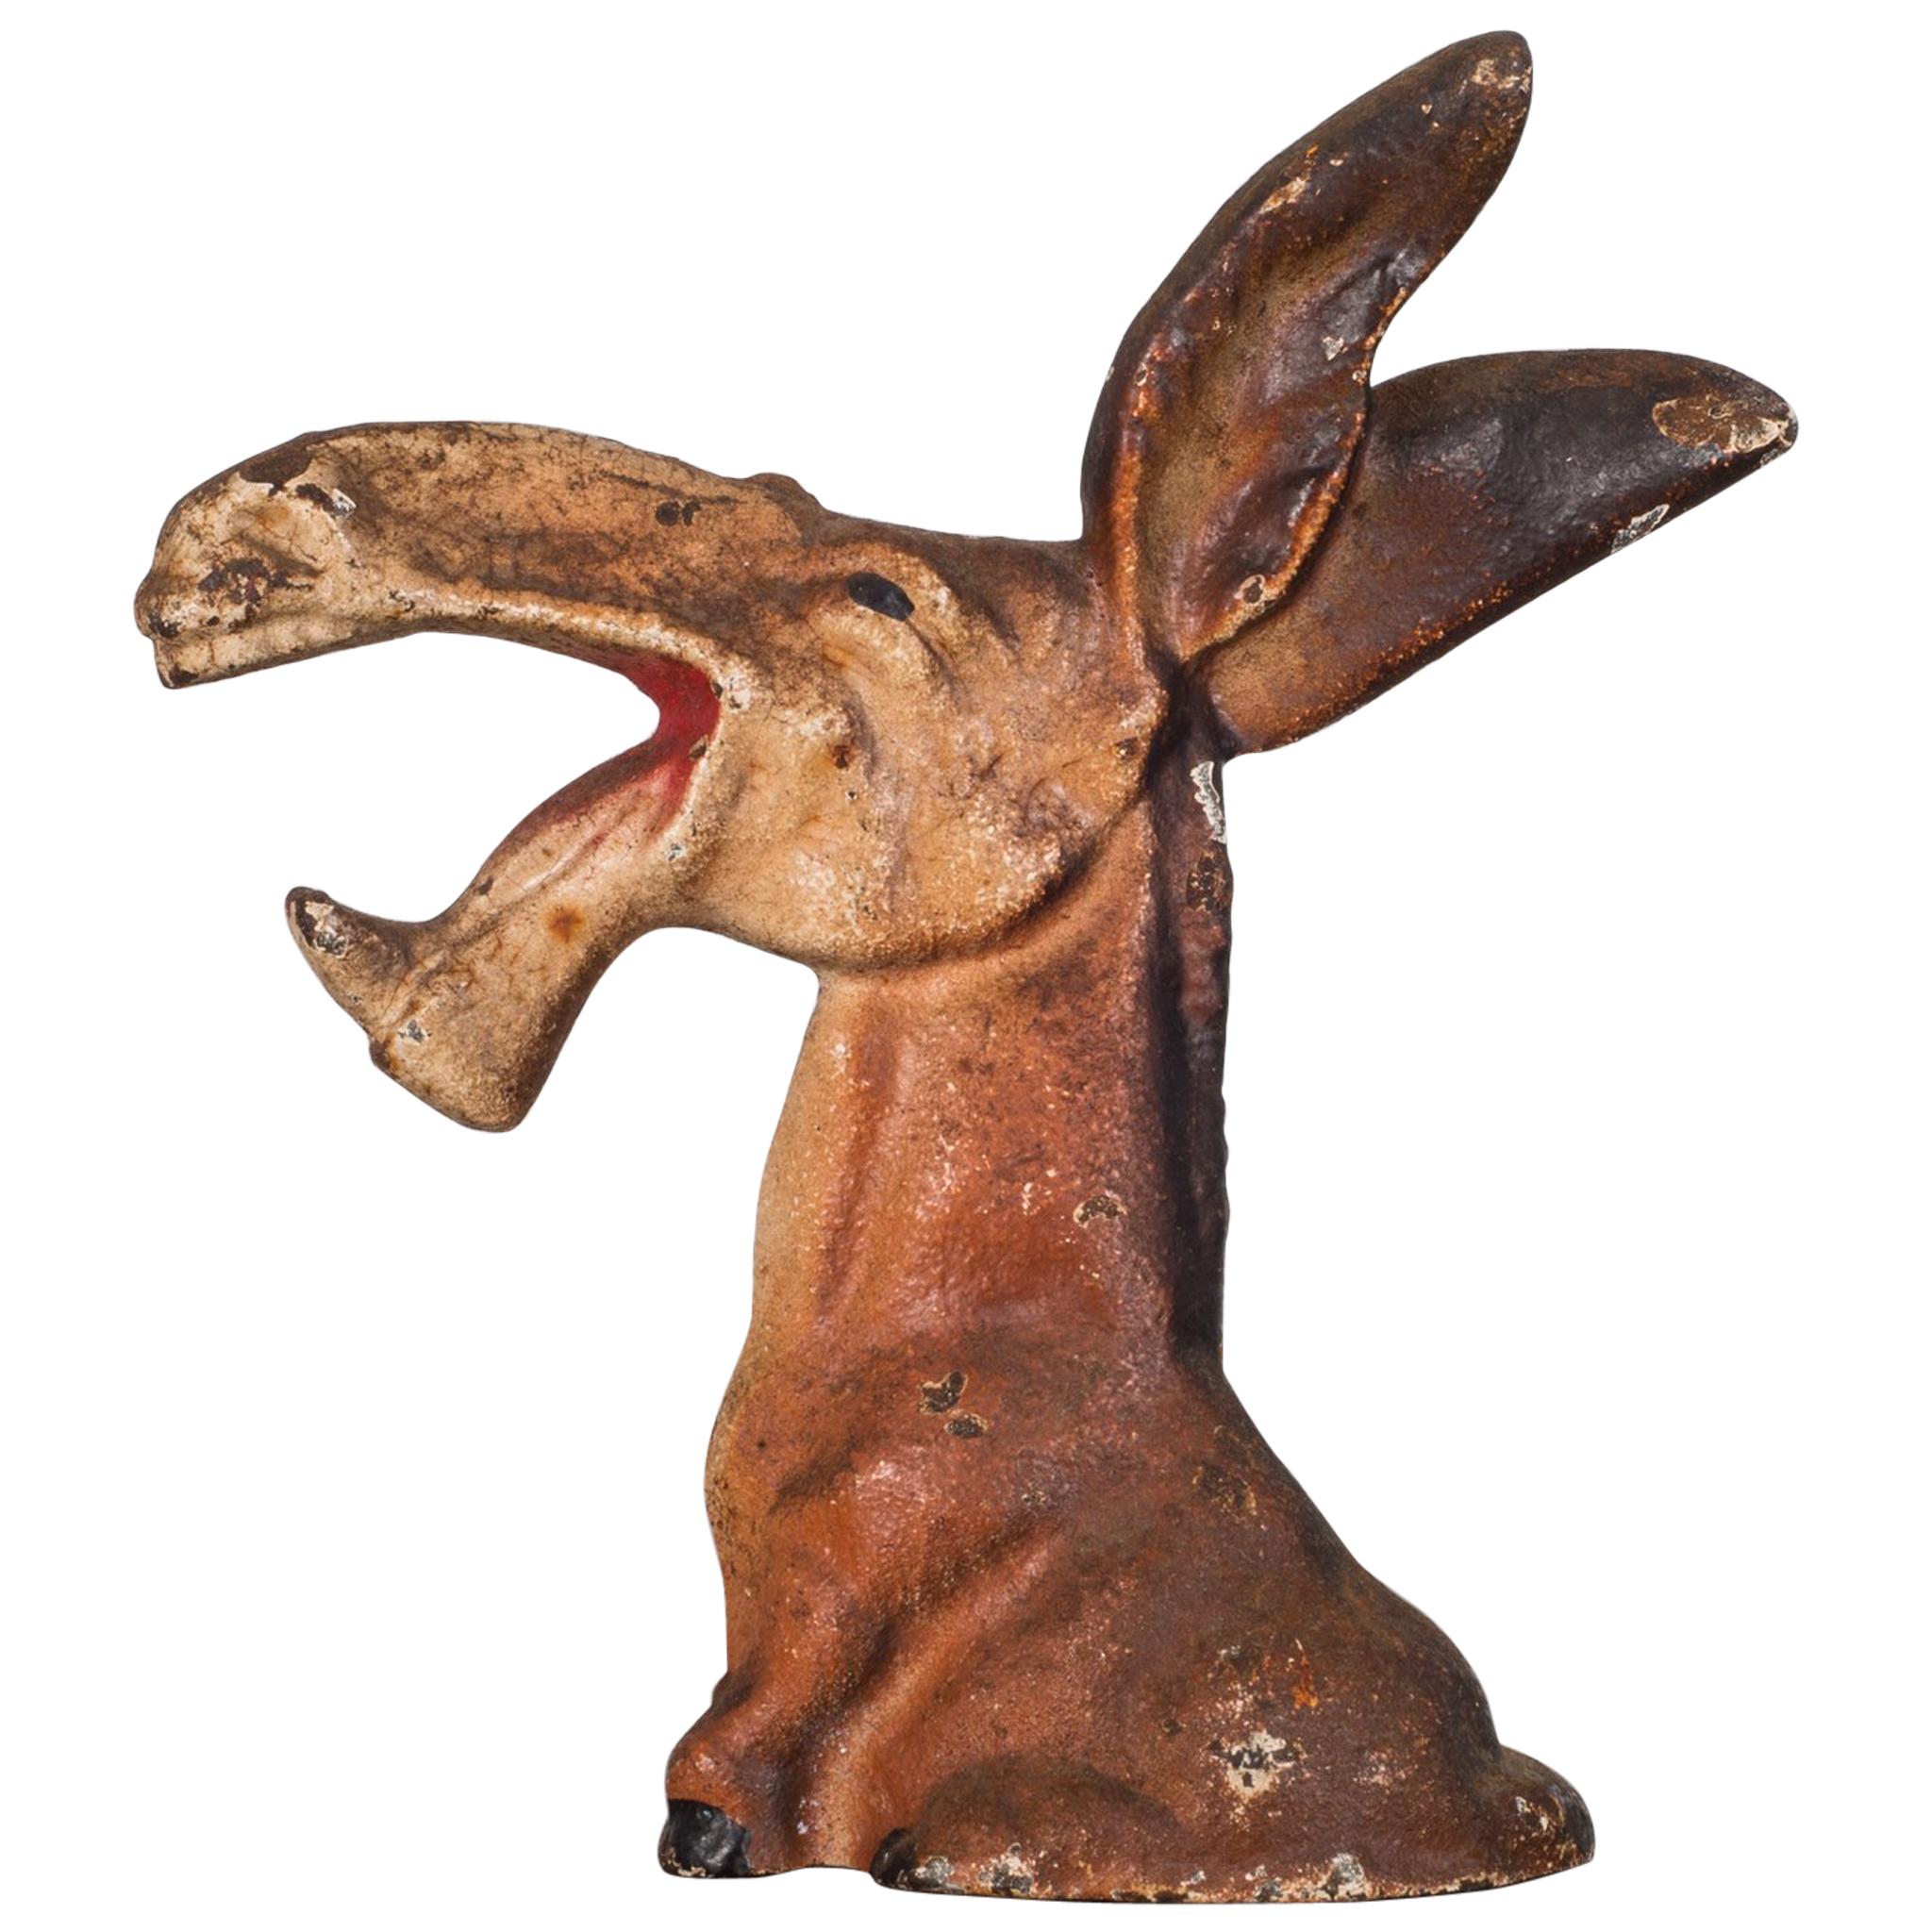 Early 20th Century Cast Iron Donkey Bottle Opener by Hubley, circa 1940s